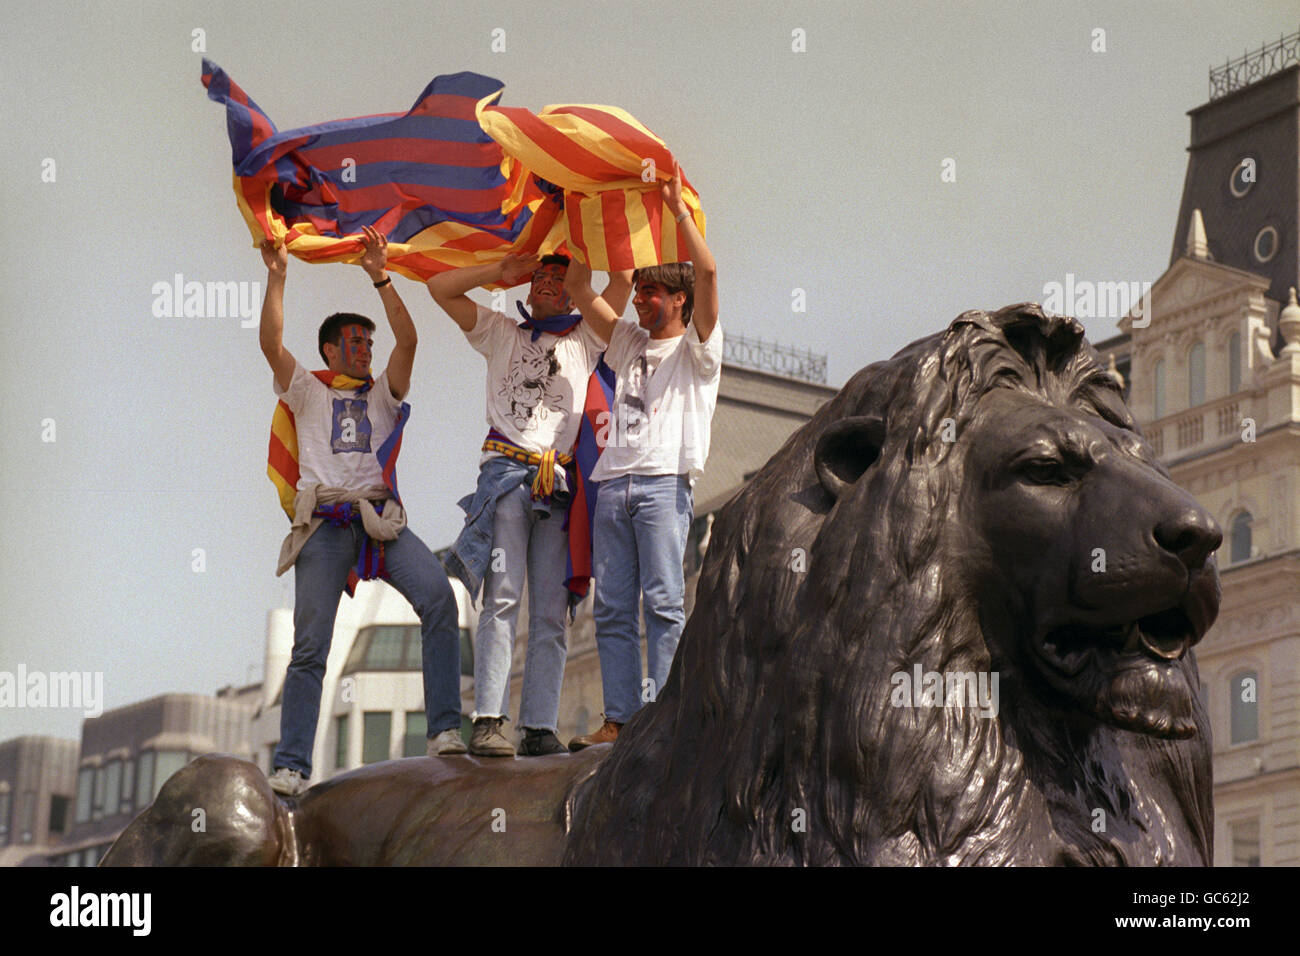 Barcelona fans waving flags from the Lions at Trafalgar Square ahead of the final at Wembley Stadium. Stock Photo